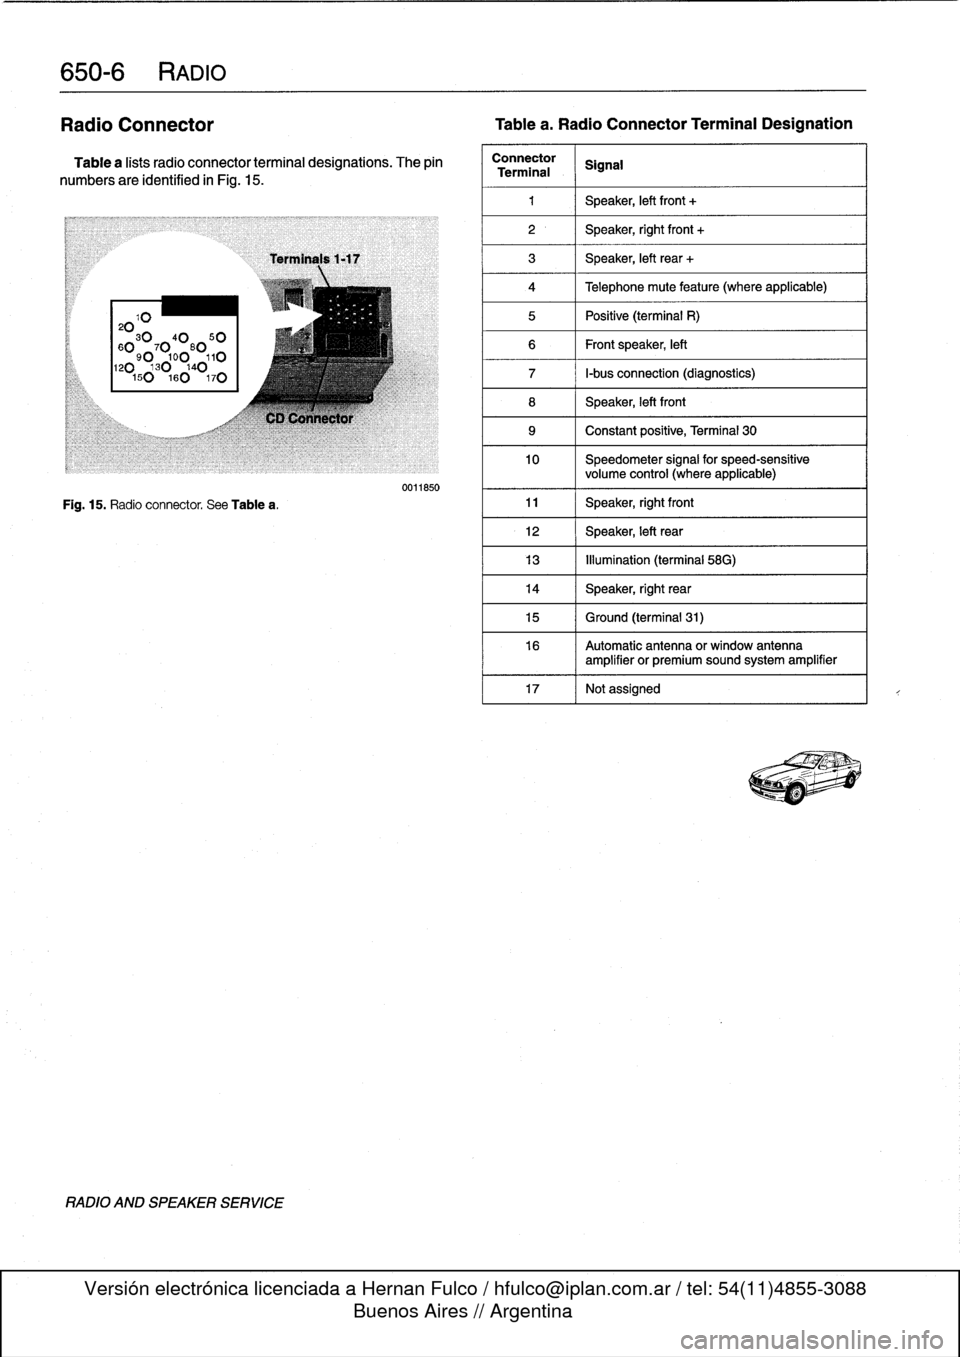 BMW 318i 1998 E36 Workshop Manual 
650-
6
RADIO

Radio
Connector

	

Tablea
.
Radio
Connector
Terminal
Designation

Table
a
lists
radio
connector
terminal
designations
.
The
pin

numbers
are
identified
in
Fig
.
15
.

20103040
50

60
9